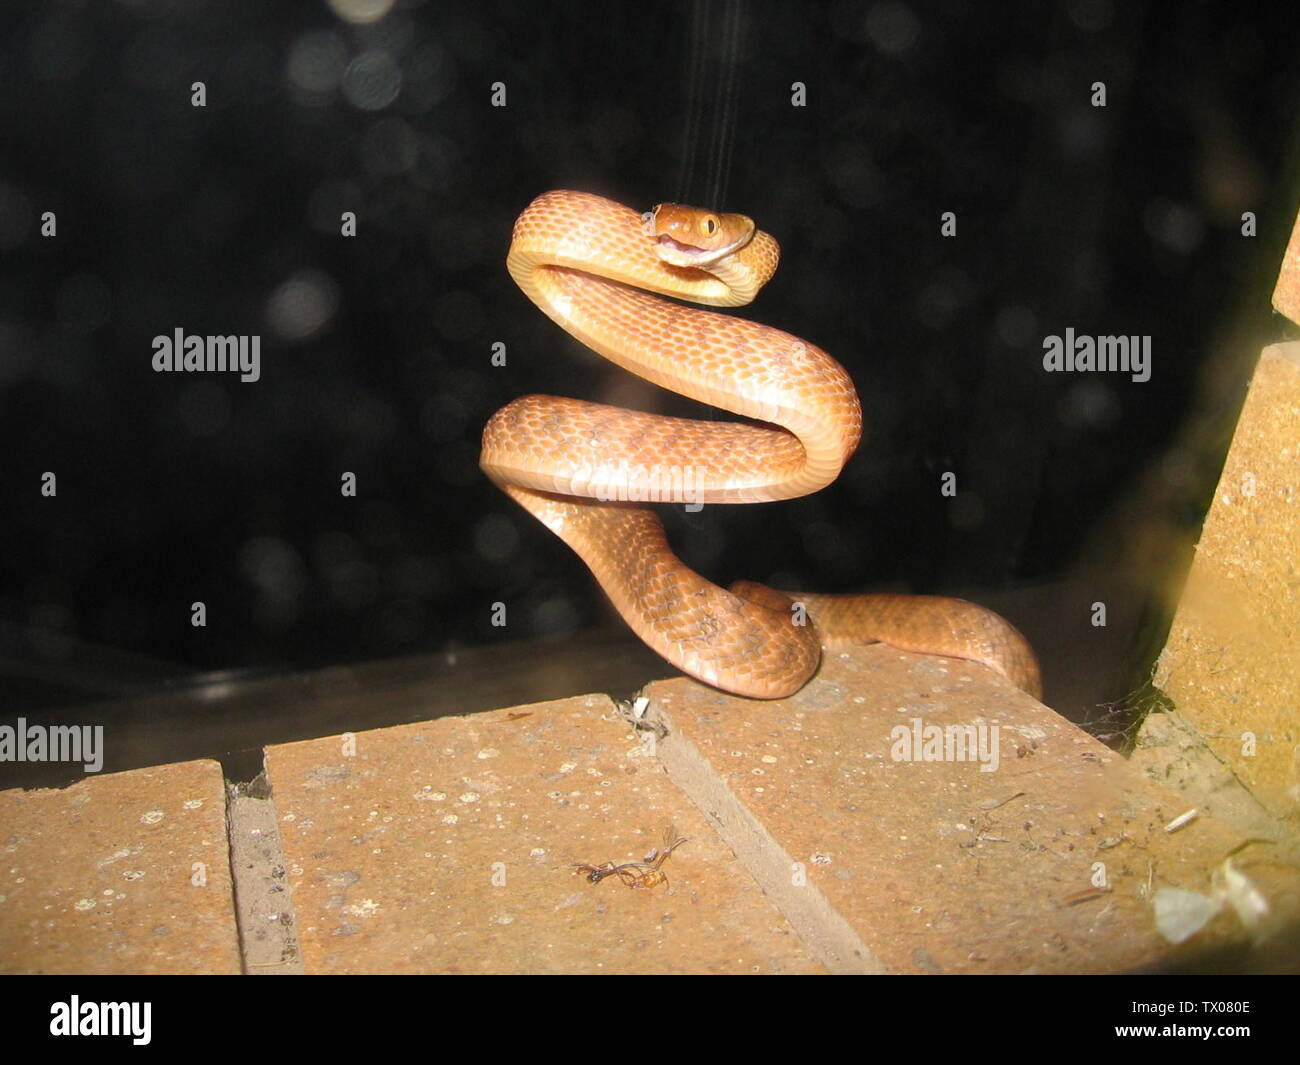 A brown tree snake (Boiga irregularis) in its characteristic coiled posture, photographed in Queensland.; 27 September 2007; Picture by English pedia editor Soulgany101, originally uploaded there as File:IMG 1228.JPG on 27 September 2007; User:Soulgany101; Stock Photo